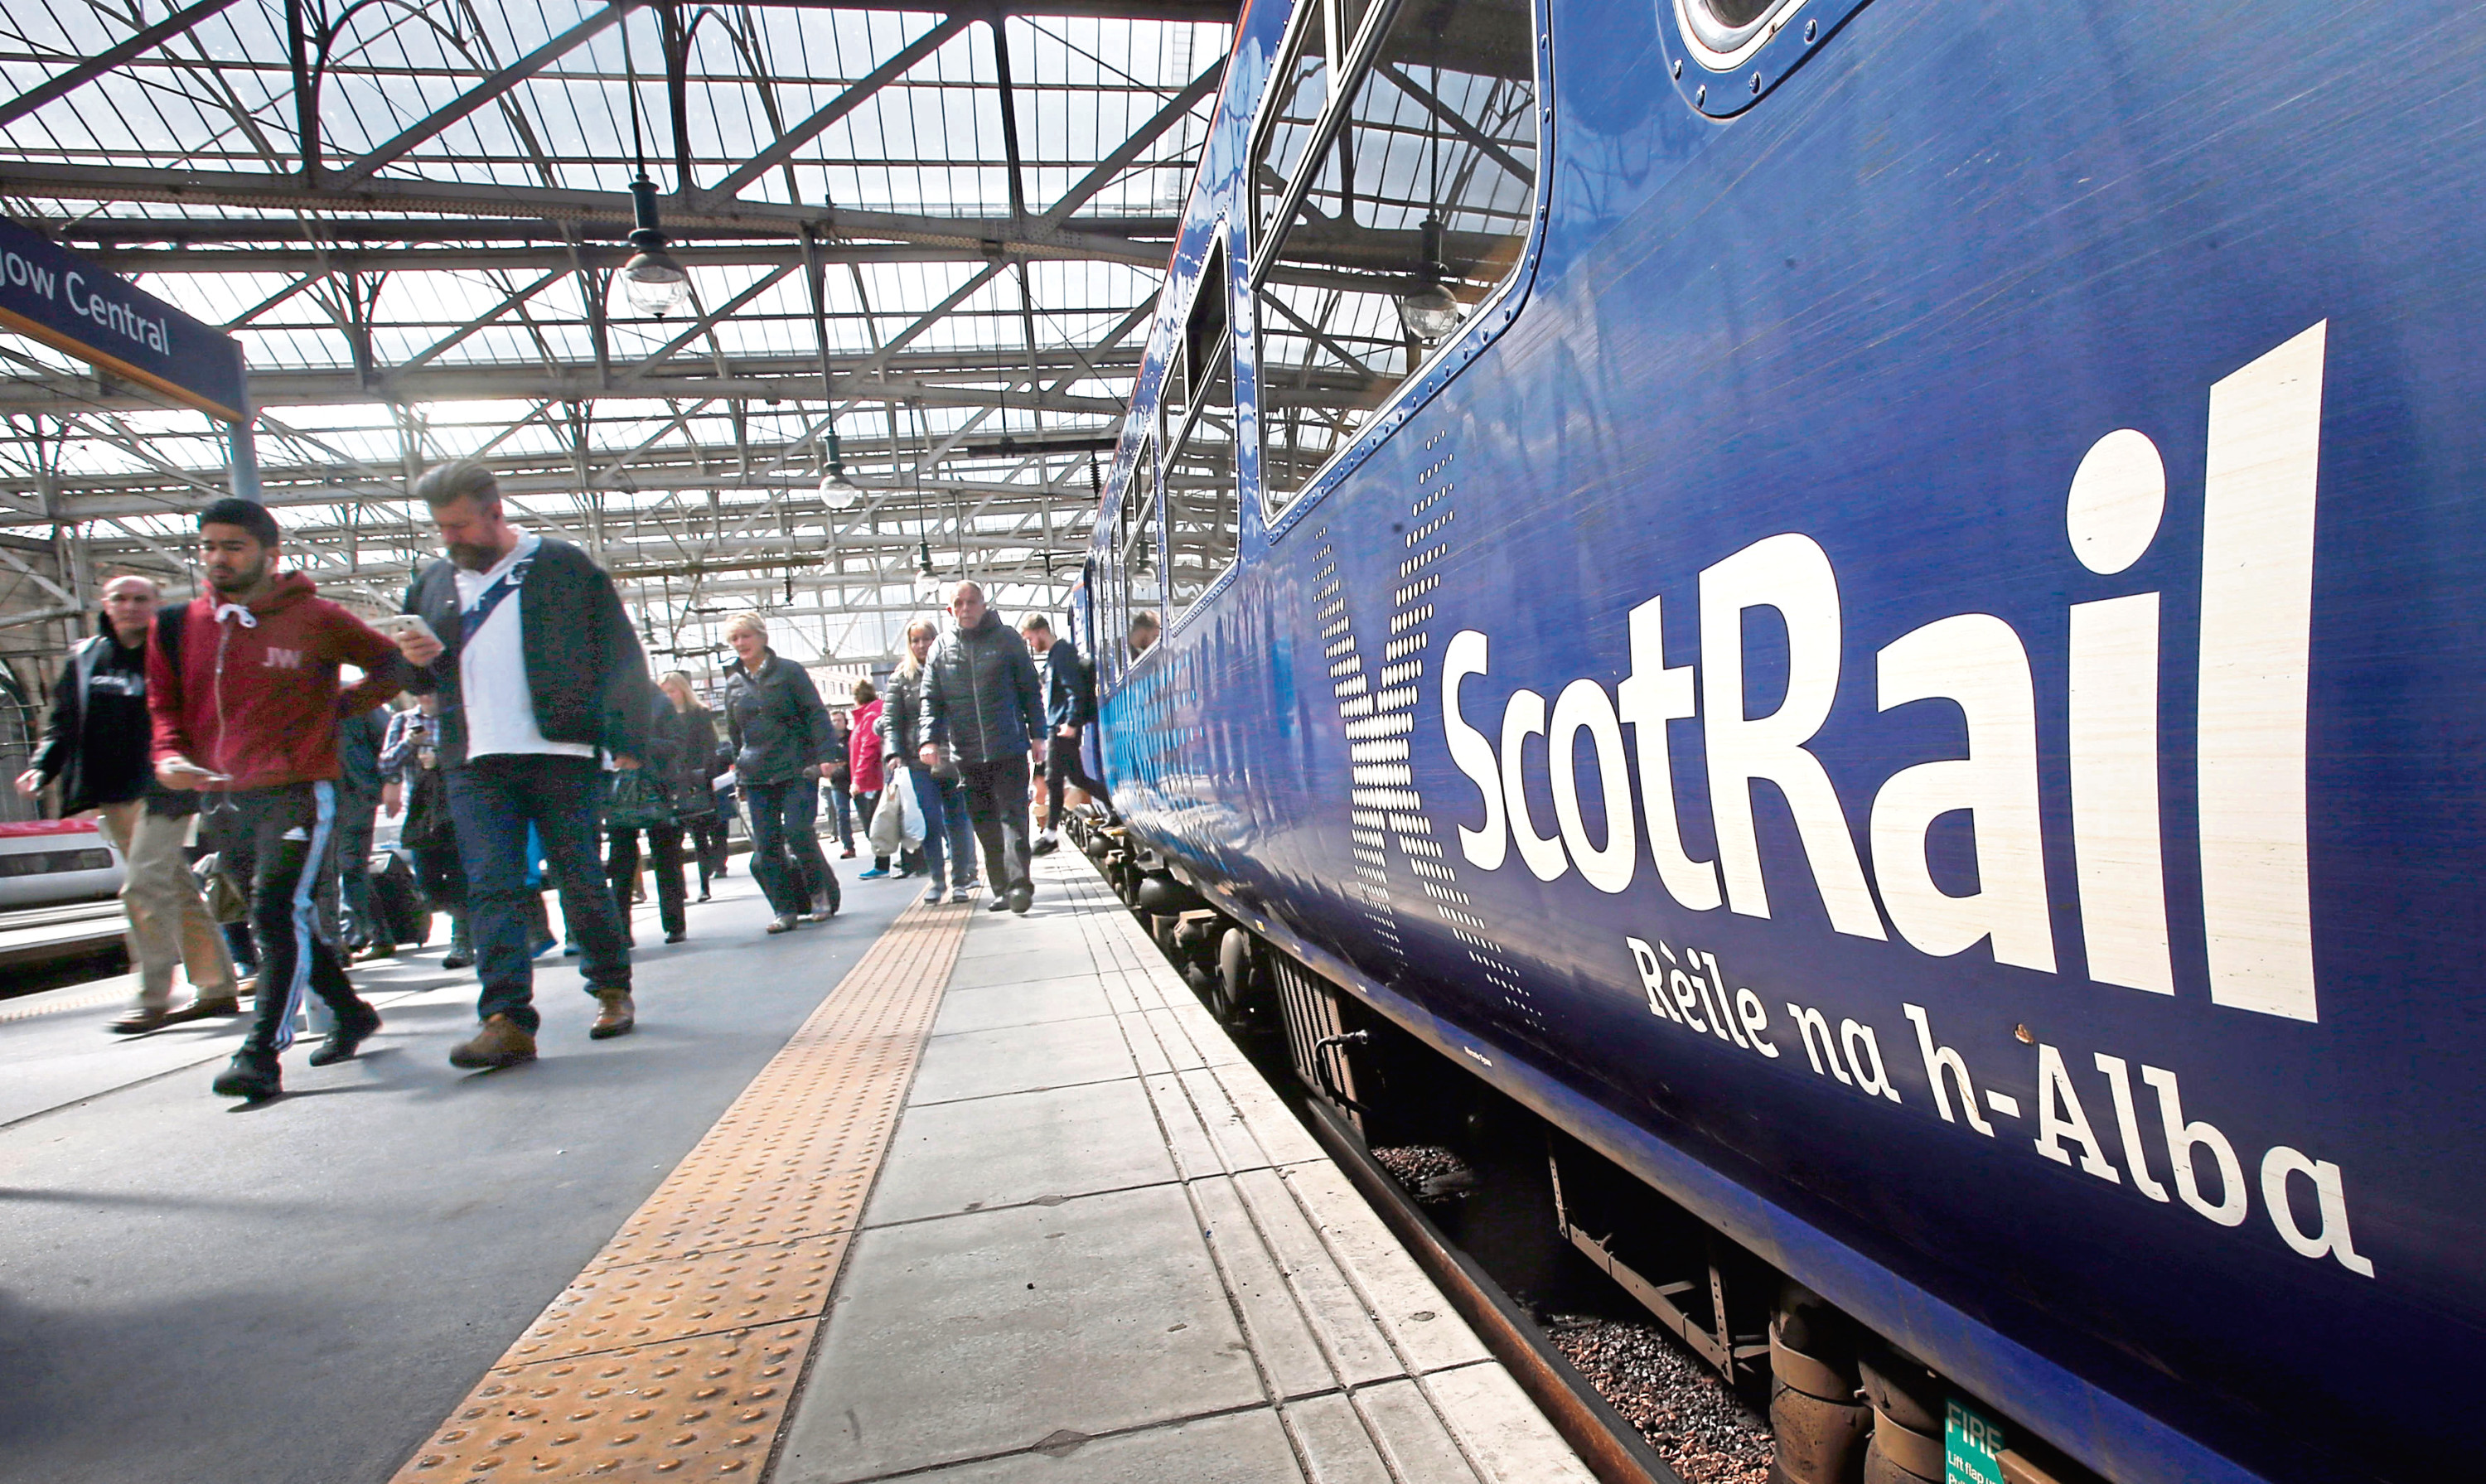 ScotRail and the Caledonian Sleeper are receiving £250 million.